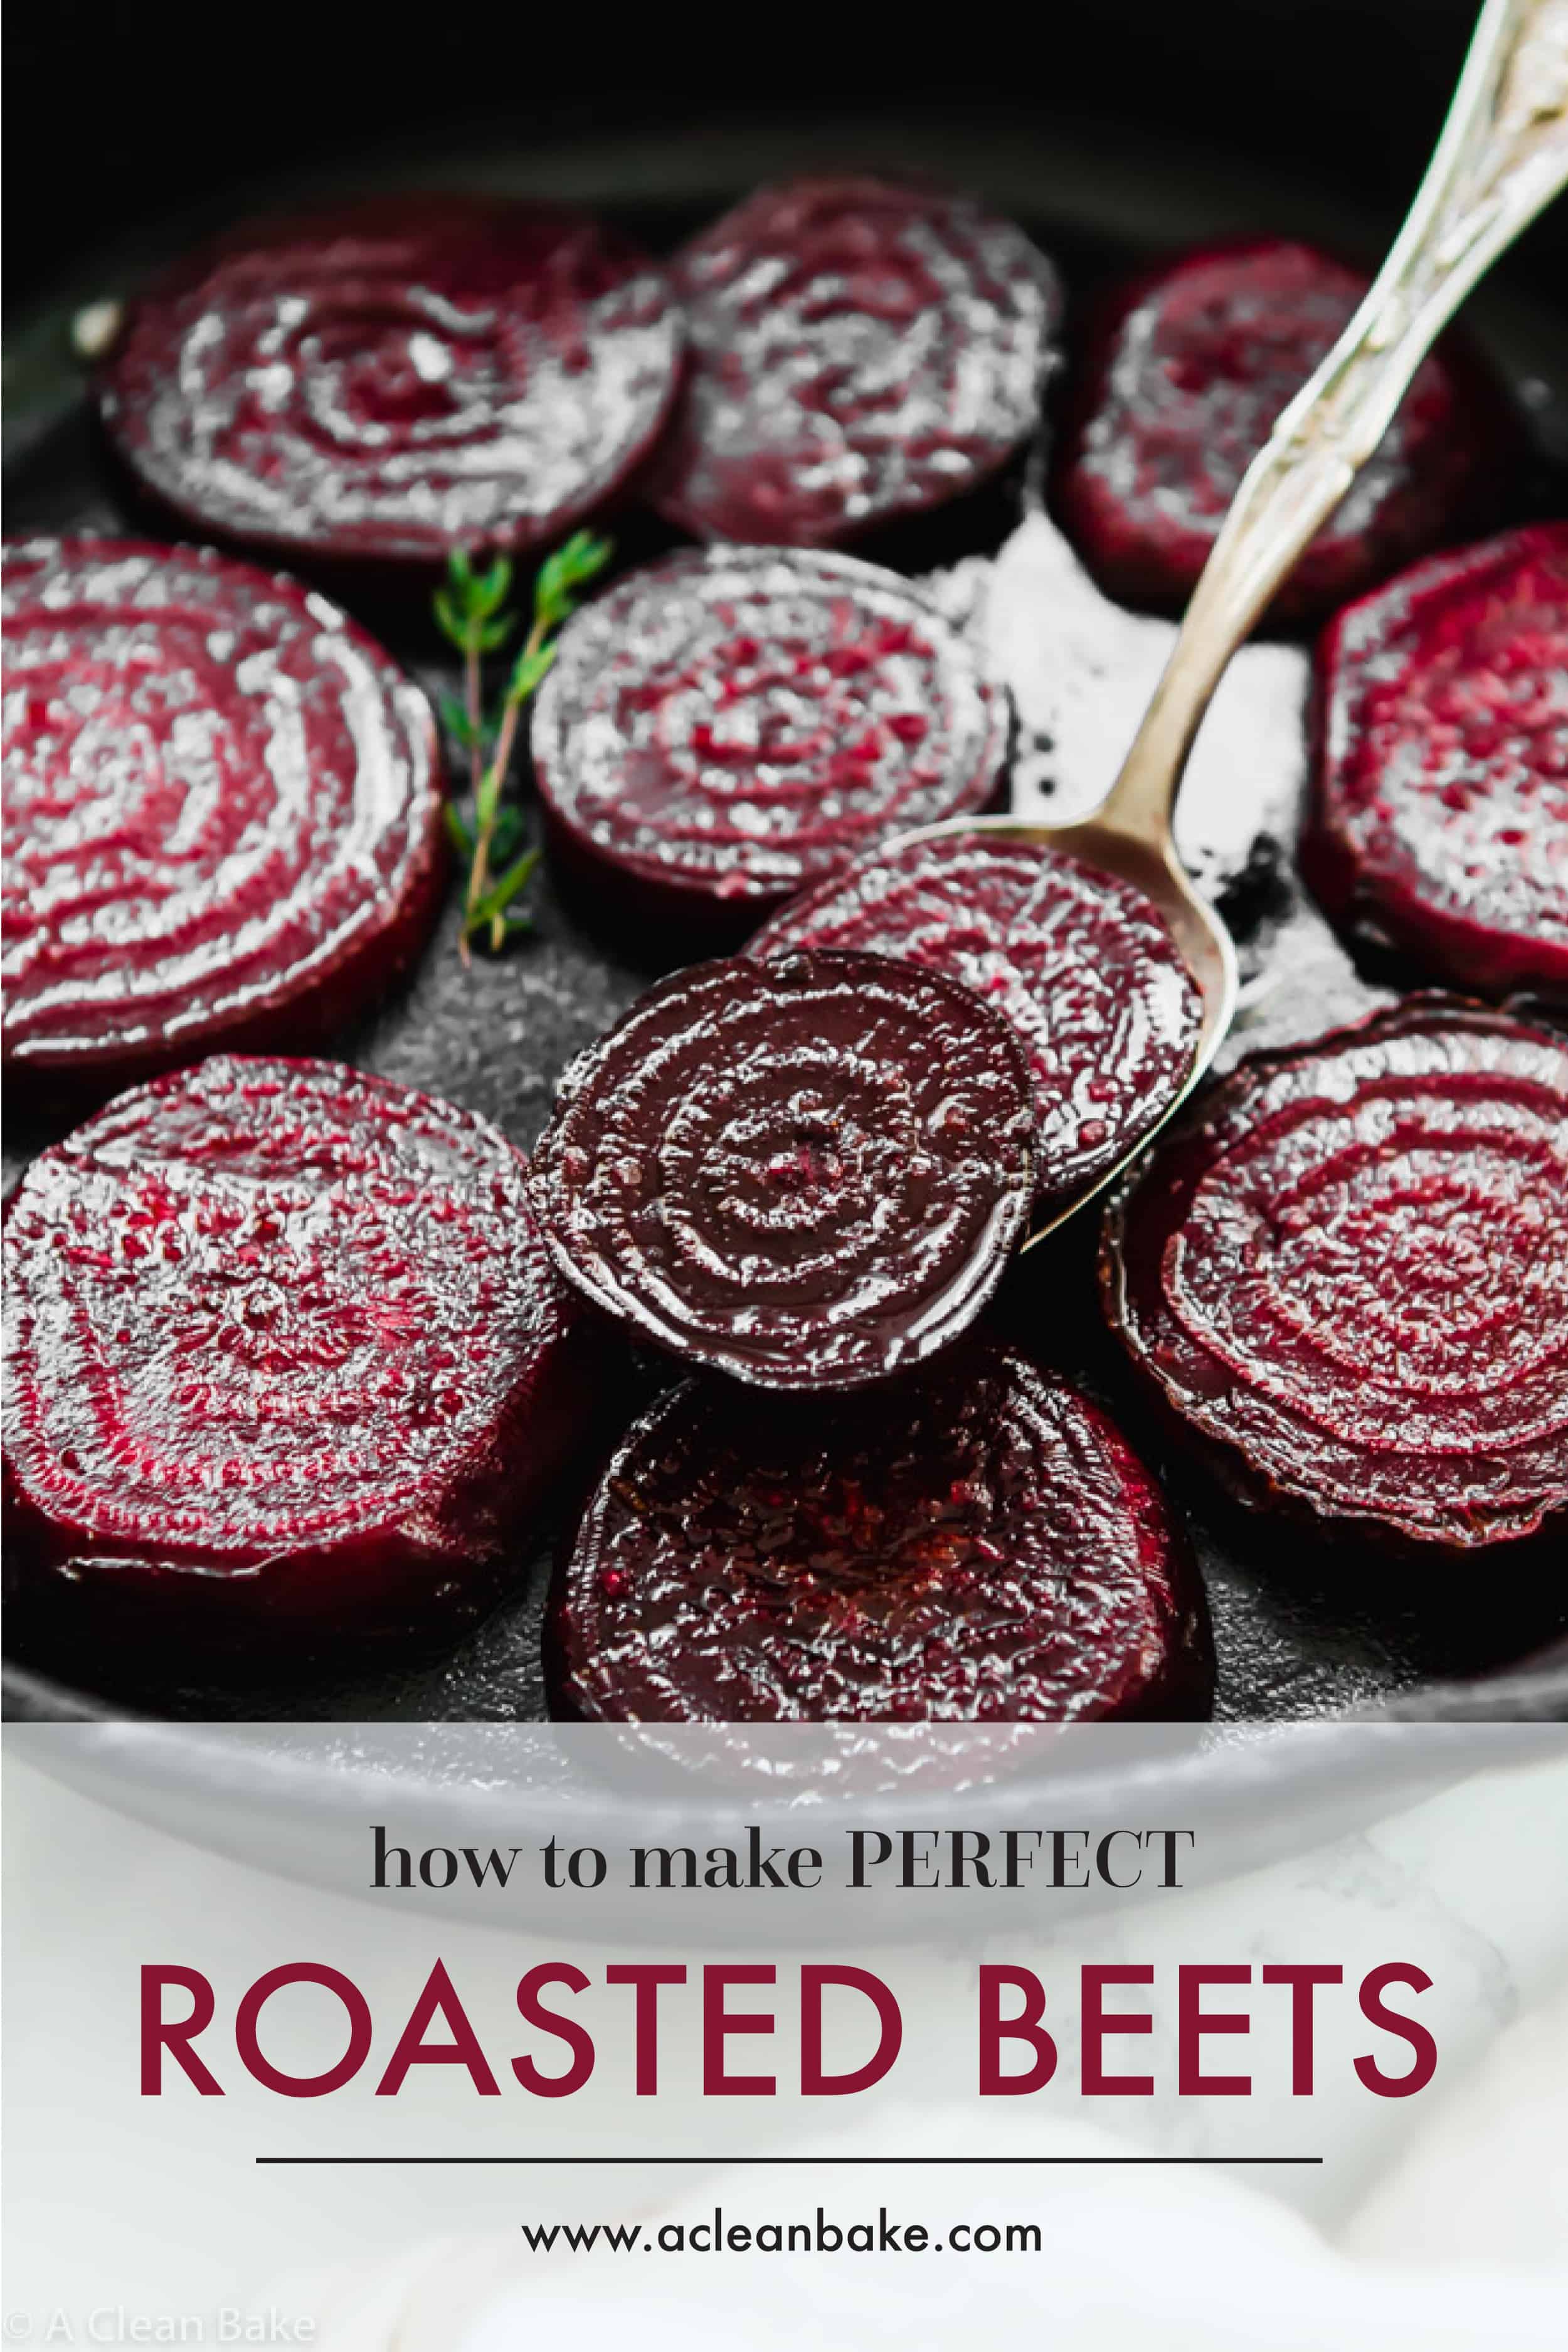 Simple Roasted Beets (GF, Vegan, Paleo, Whole30) | A Clean Bake